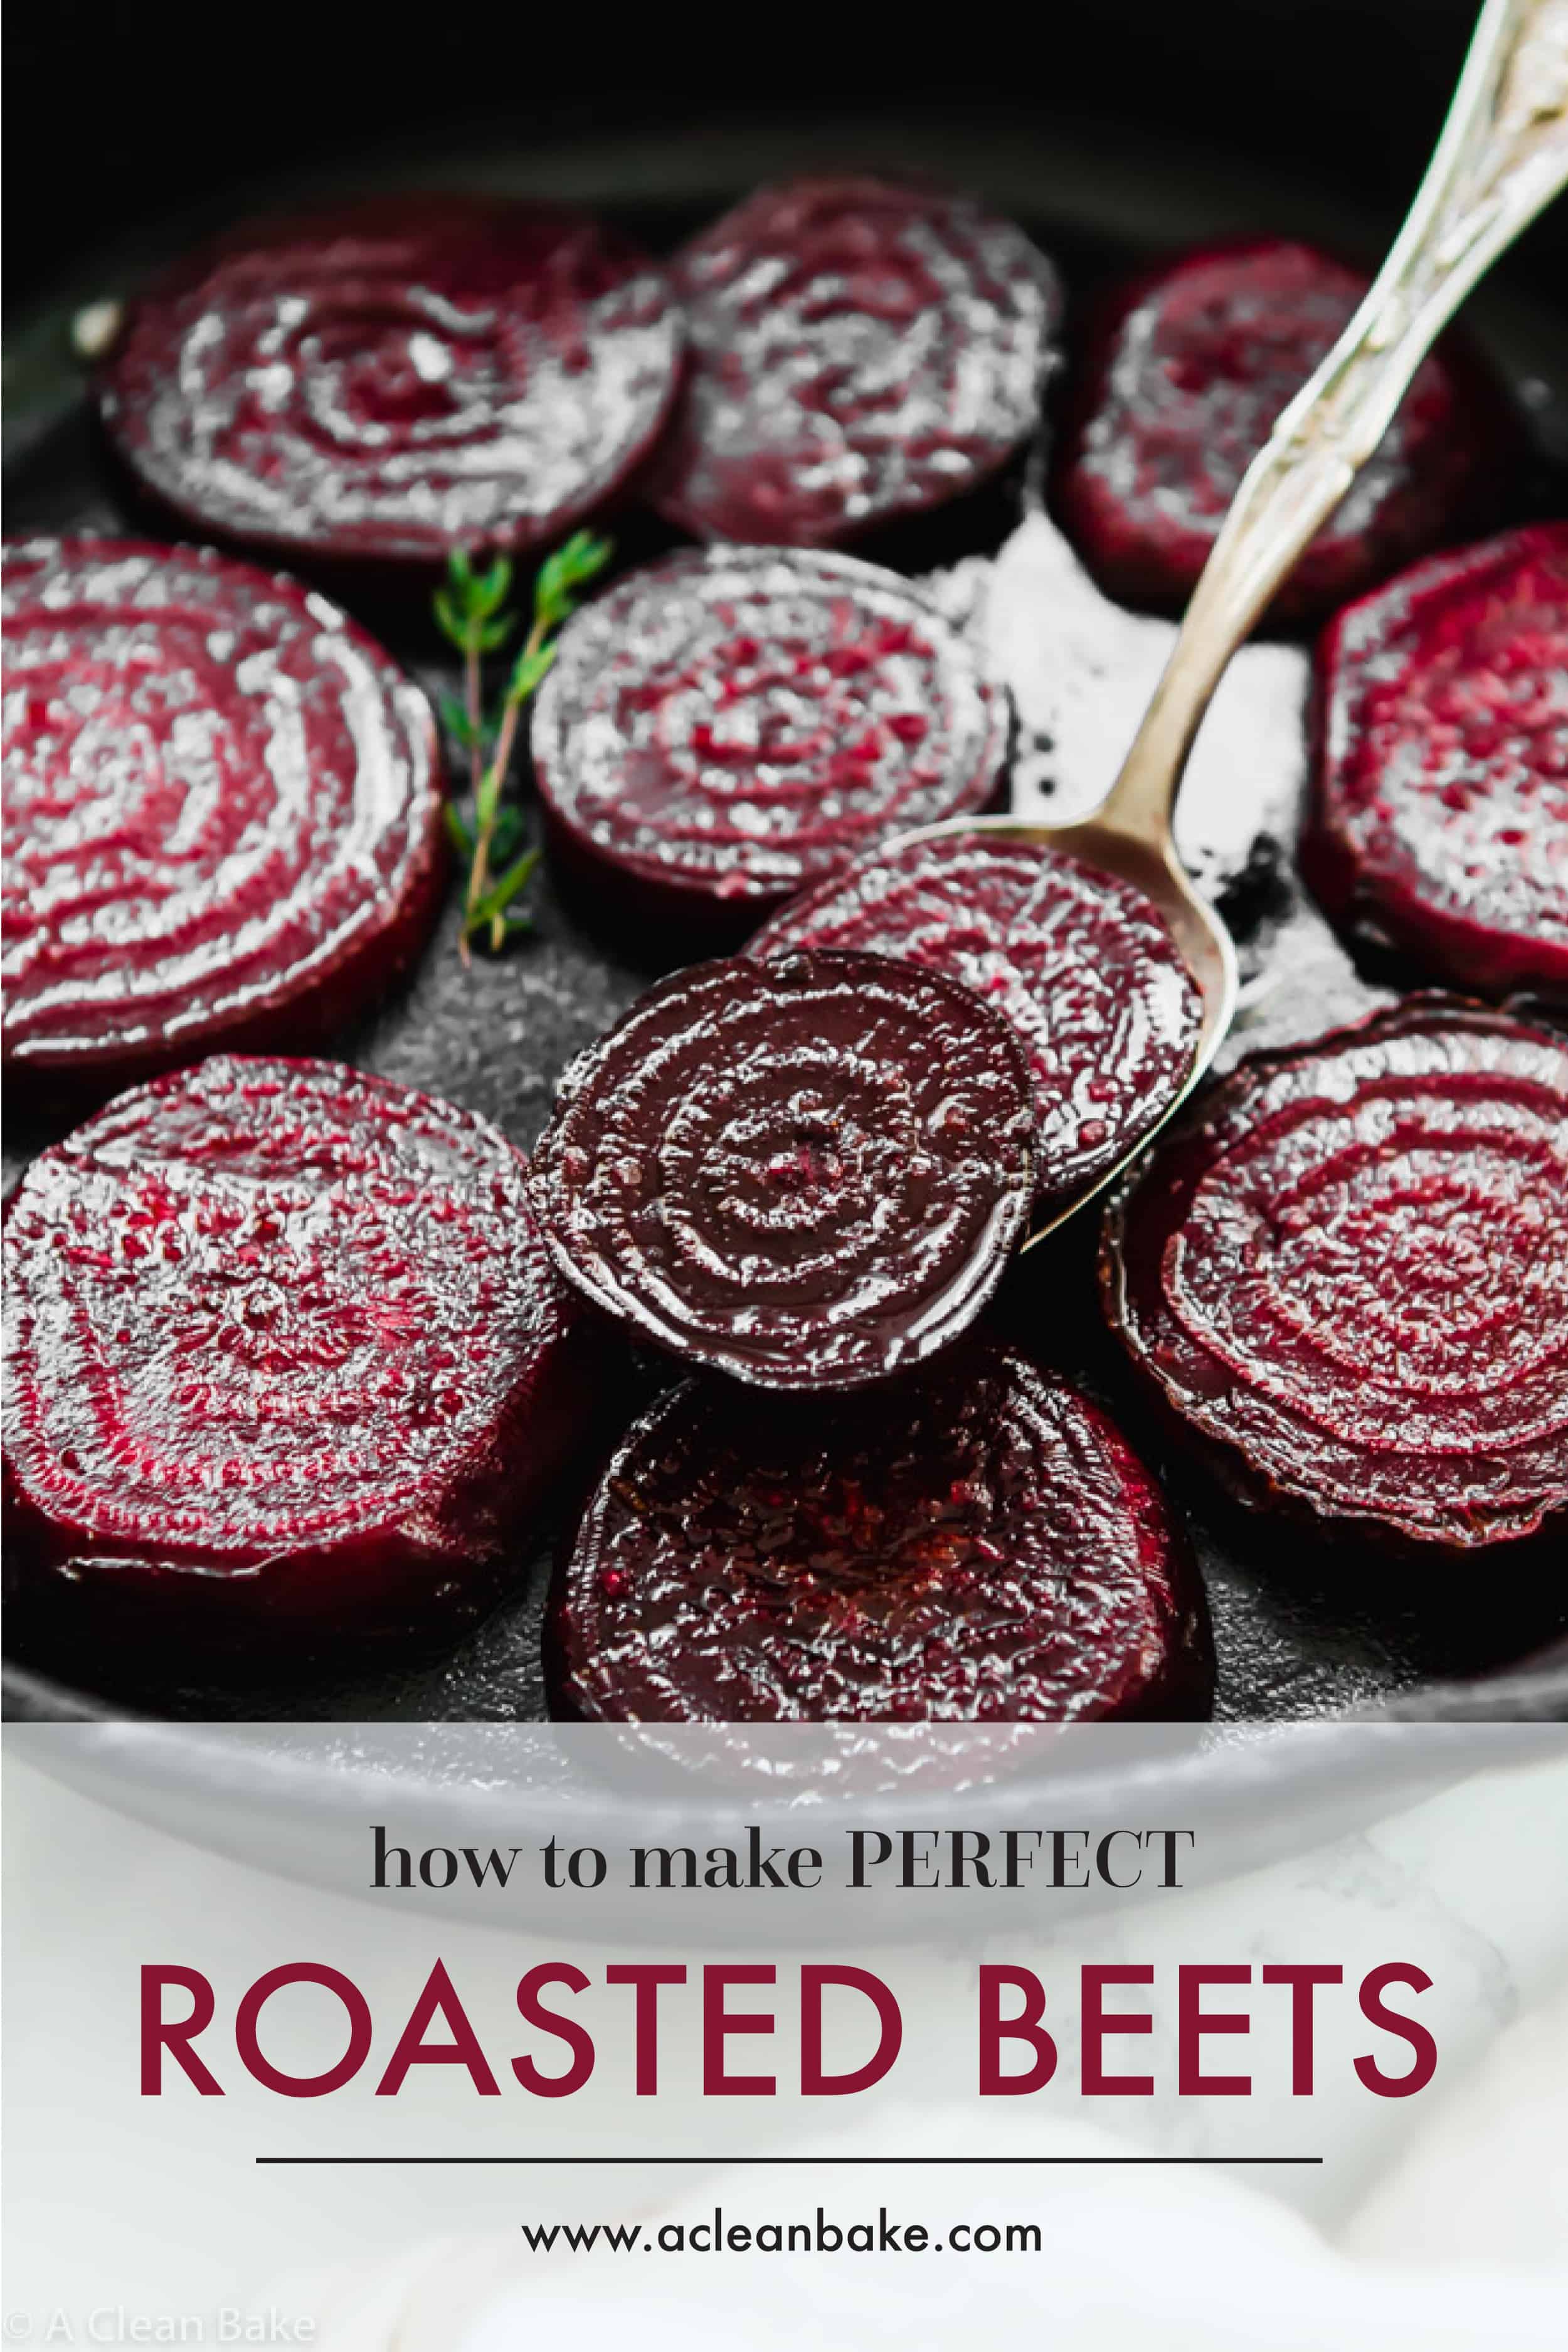 Simple Roasted Beets (GF, Vegan, Paleo, Whole30) | A Clean Bake